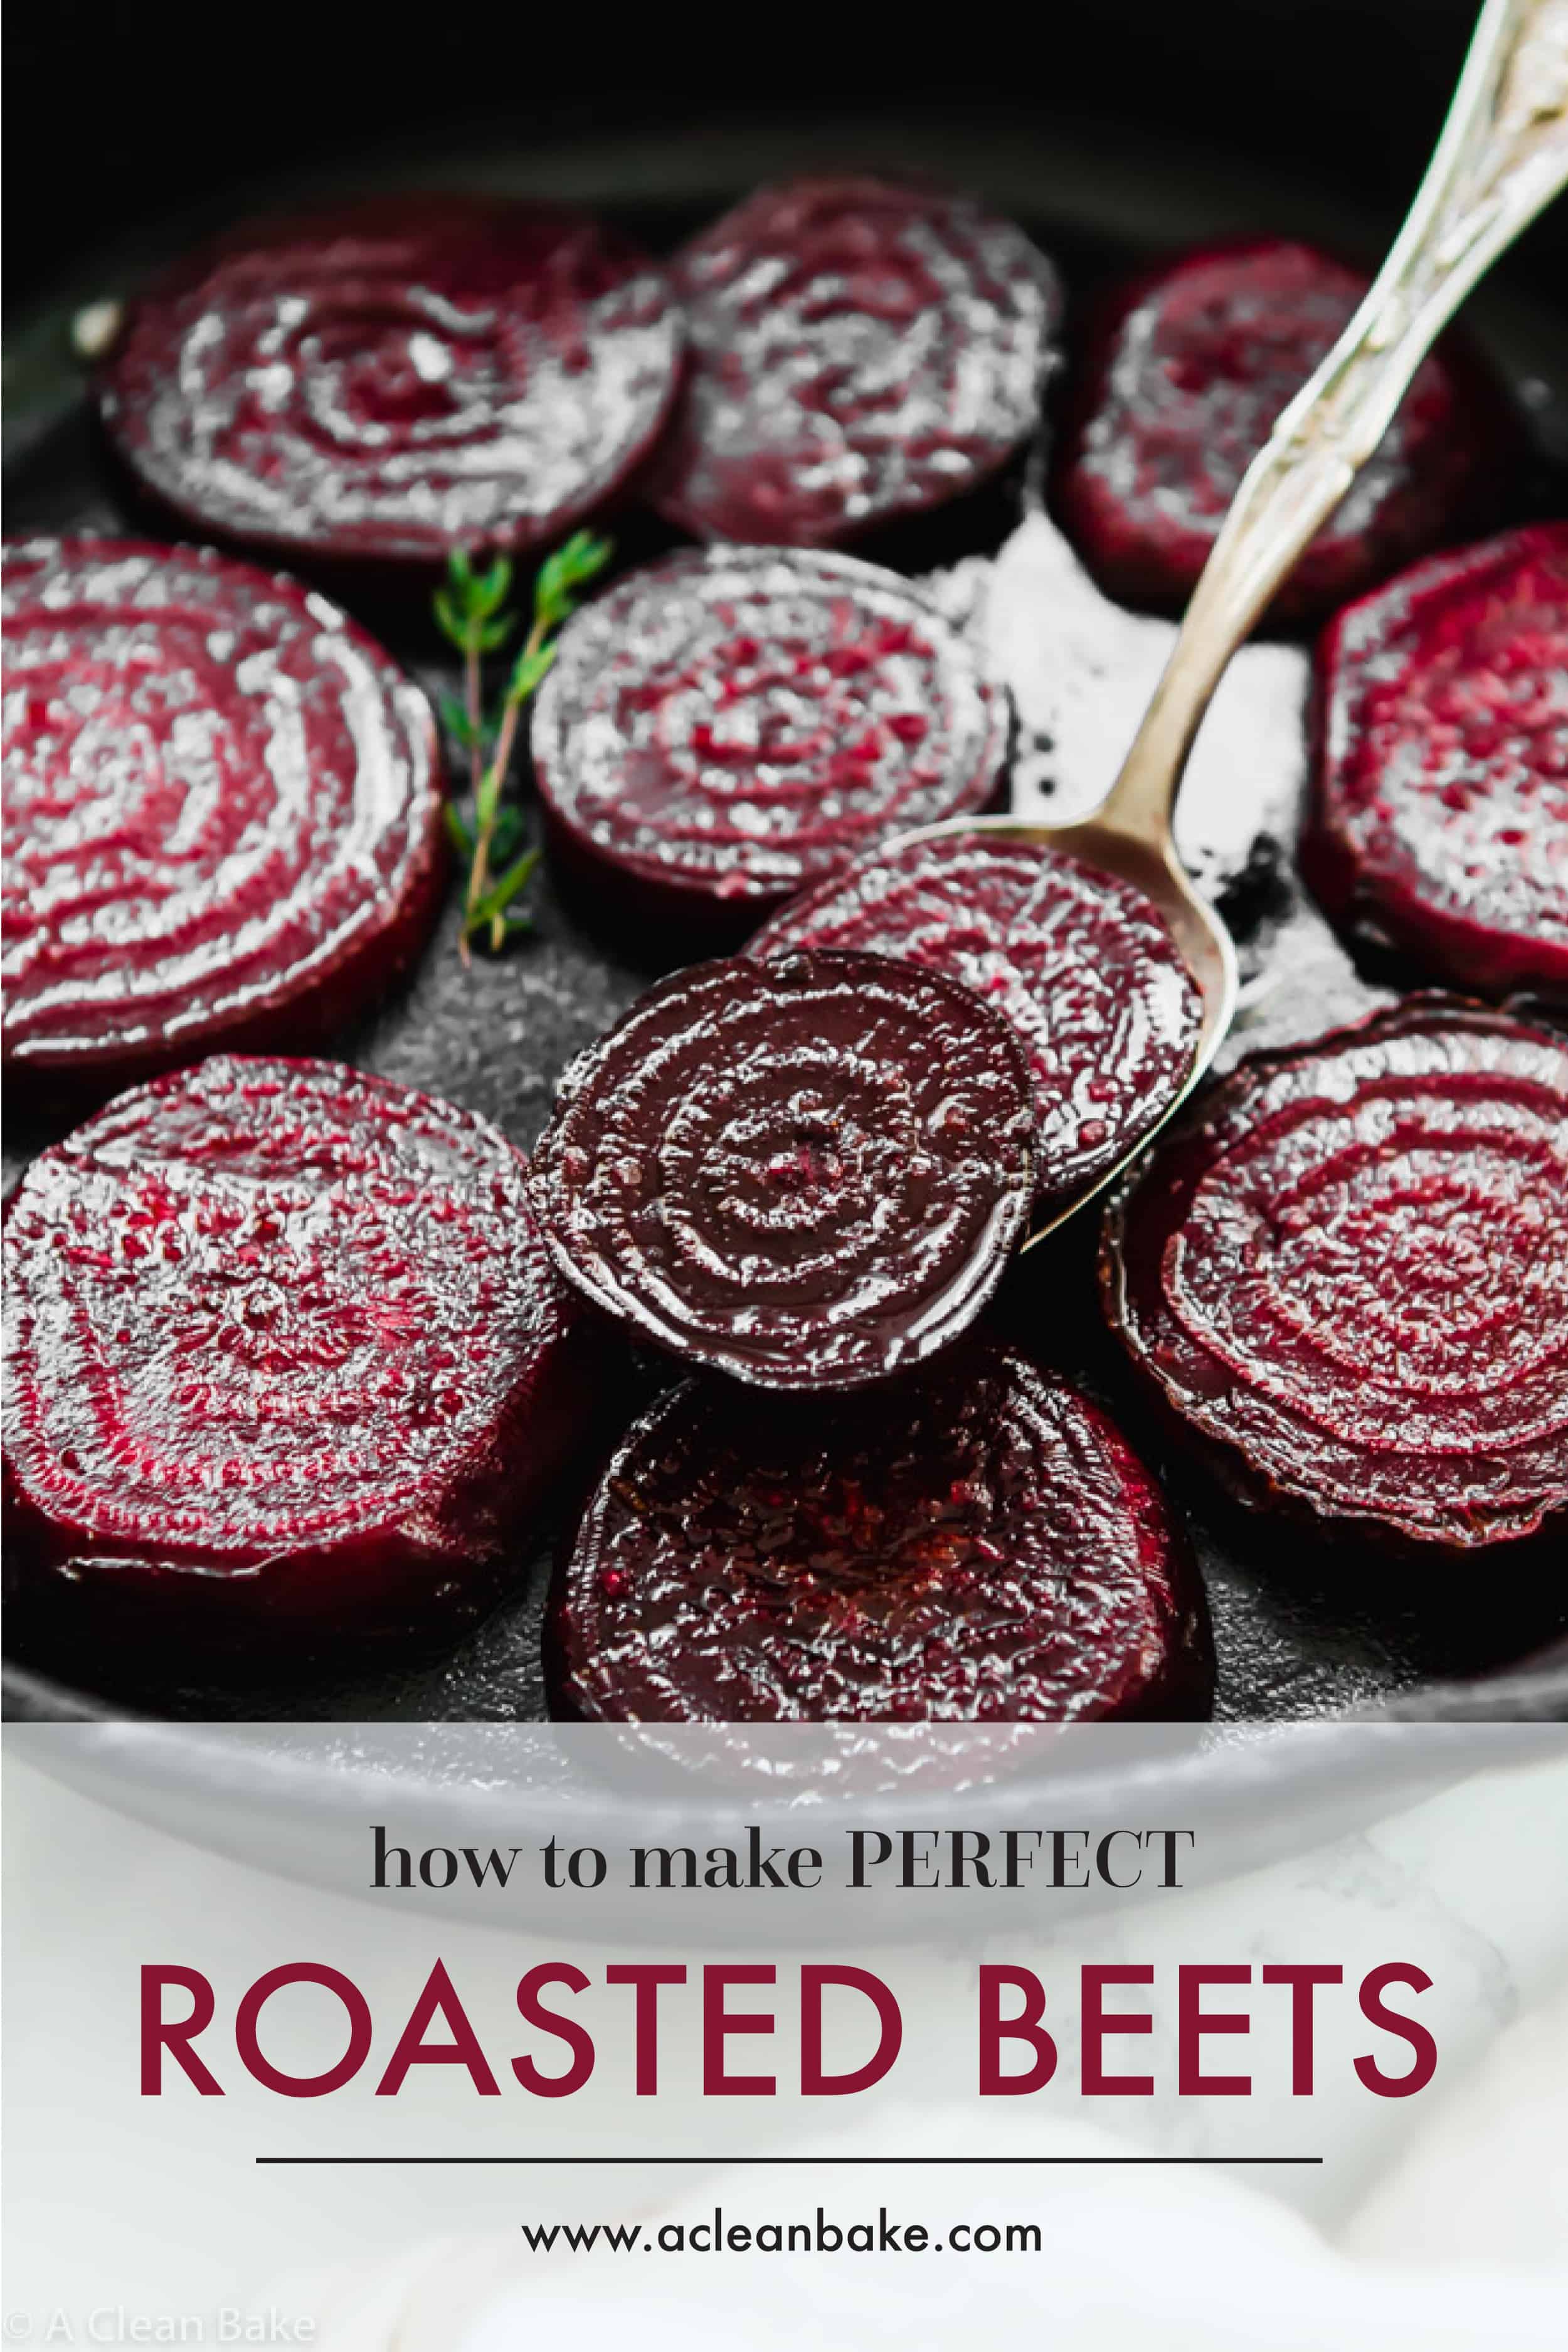 Simple Roasted Beets (GF, Vegan, Paleo, Whole30) | A Clean Bake